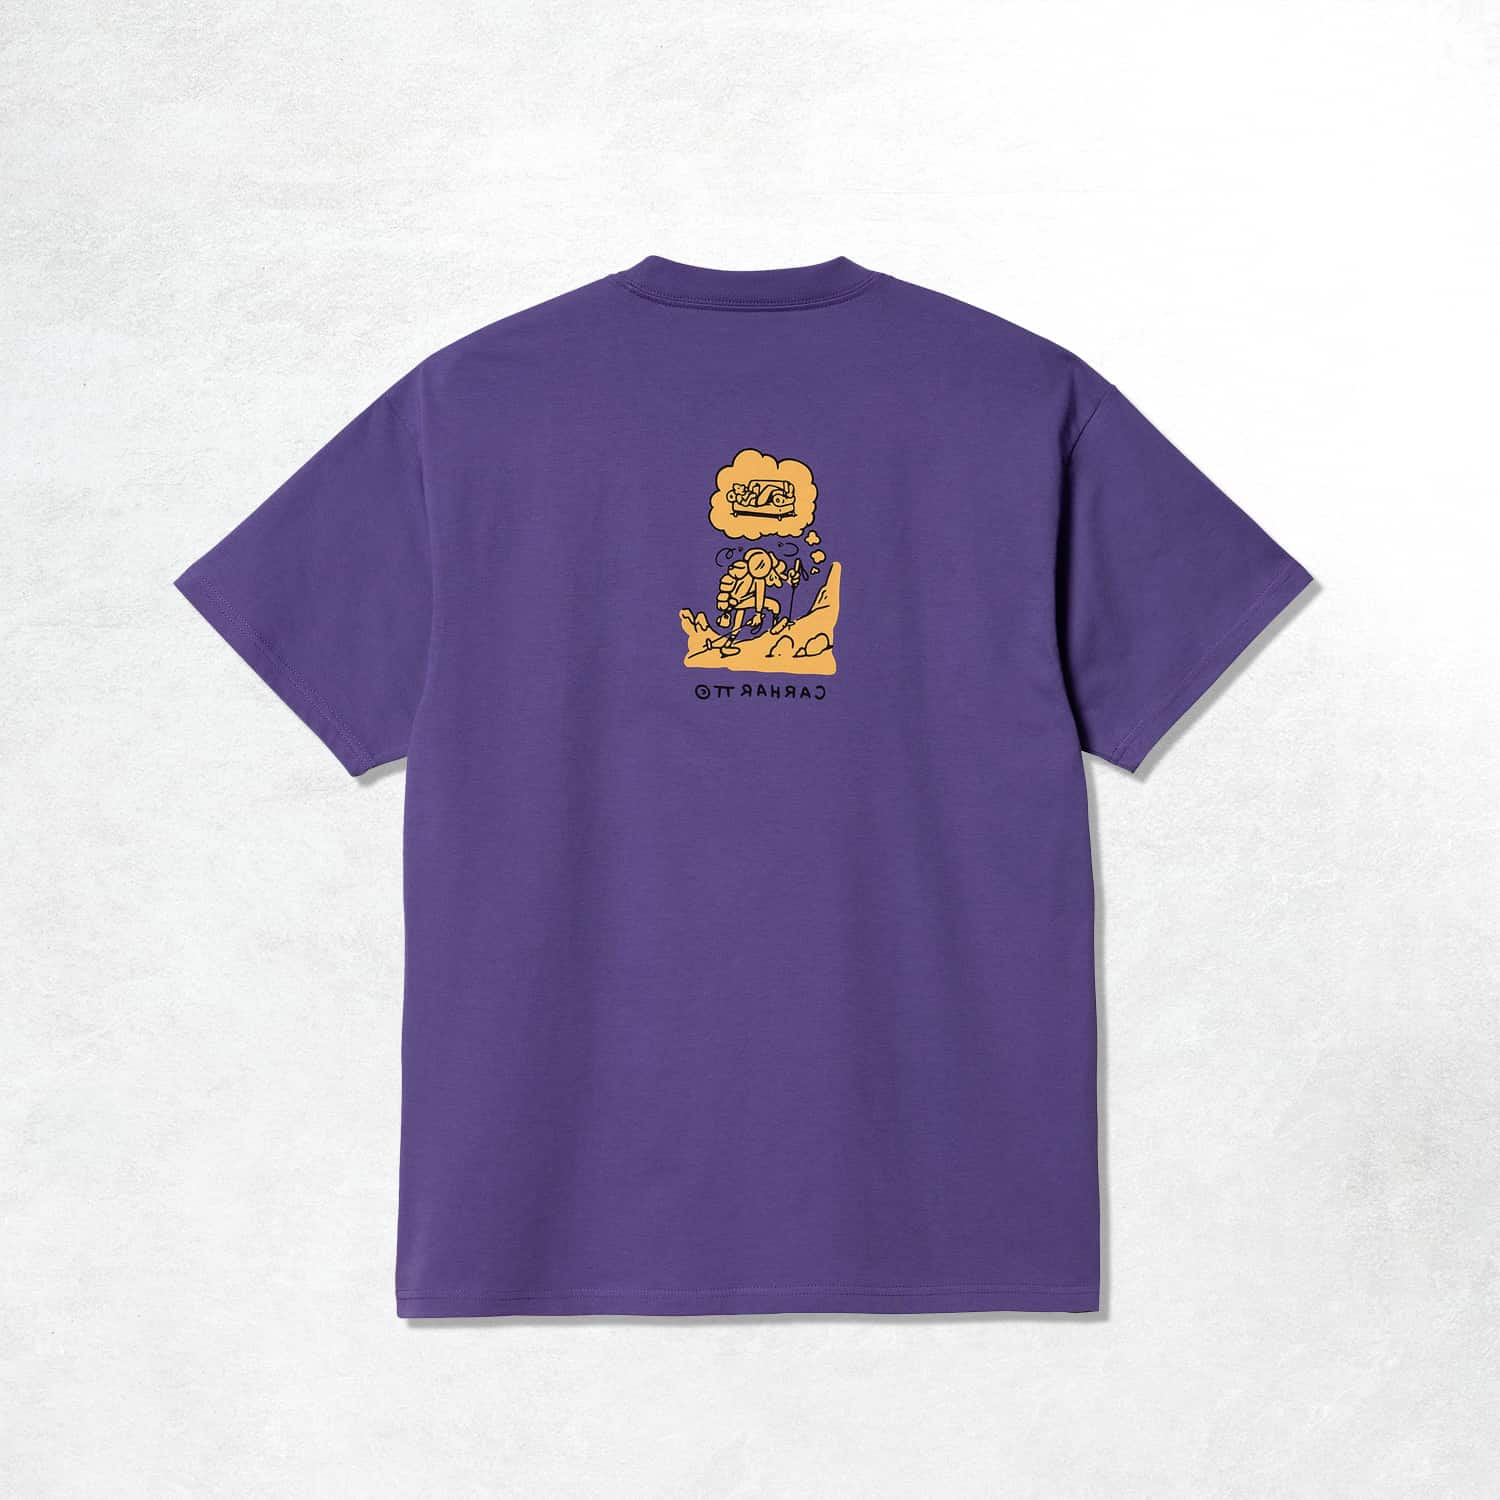 Carhartt WIP S/S Other Side T-Shirt: Arrenga (Back)